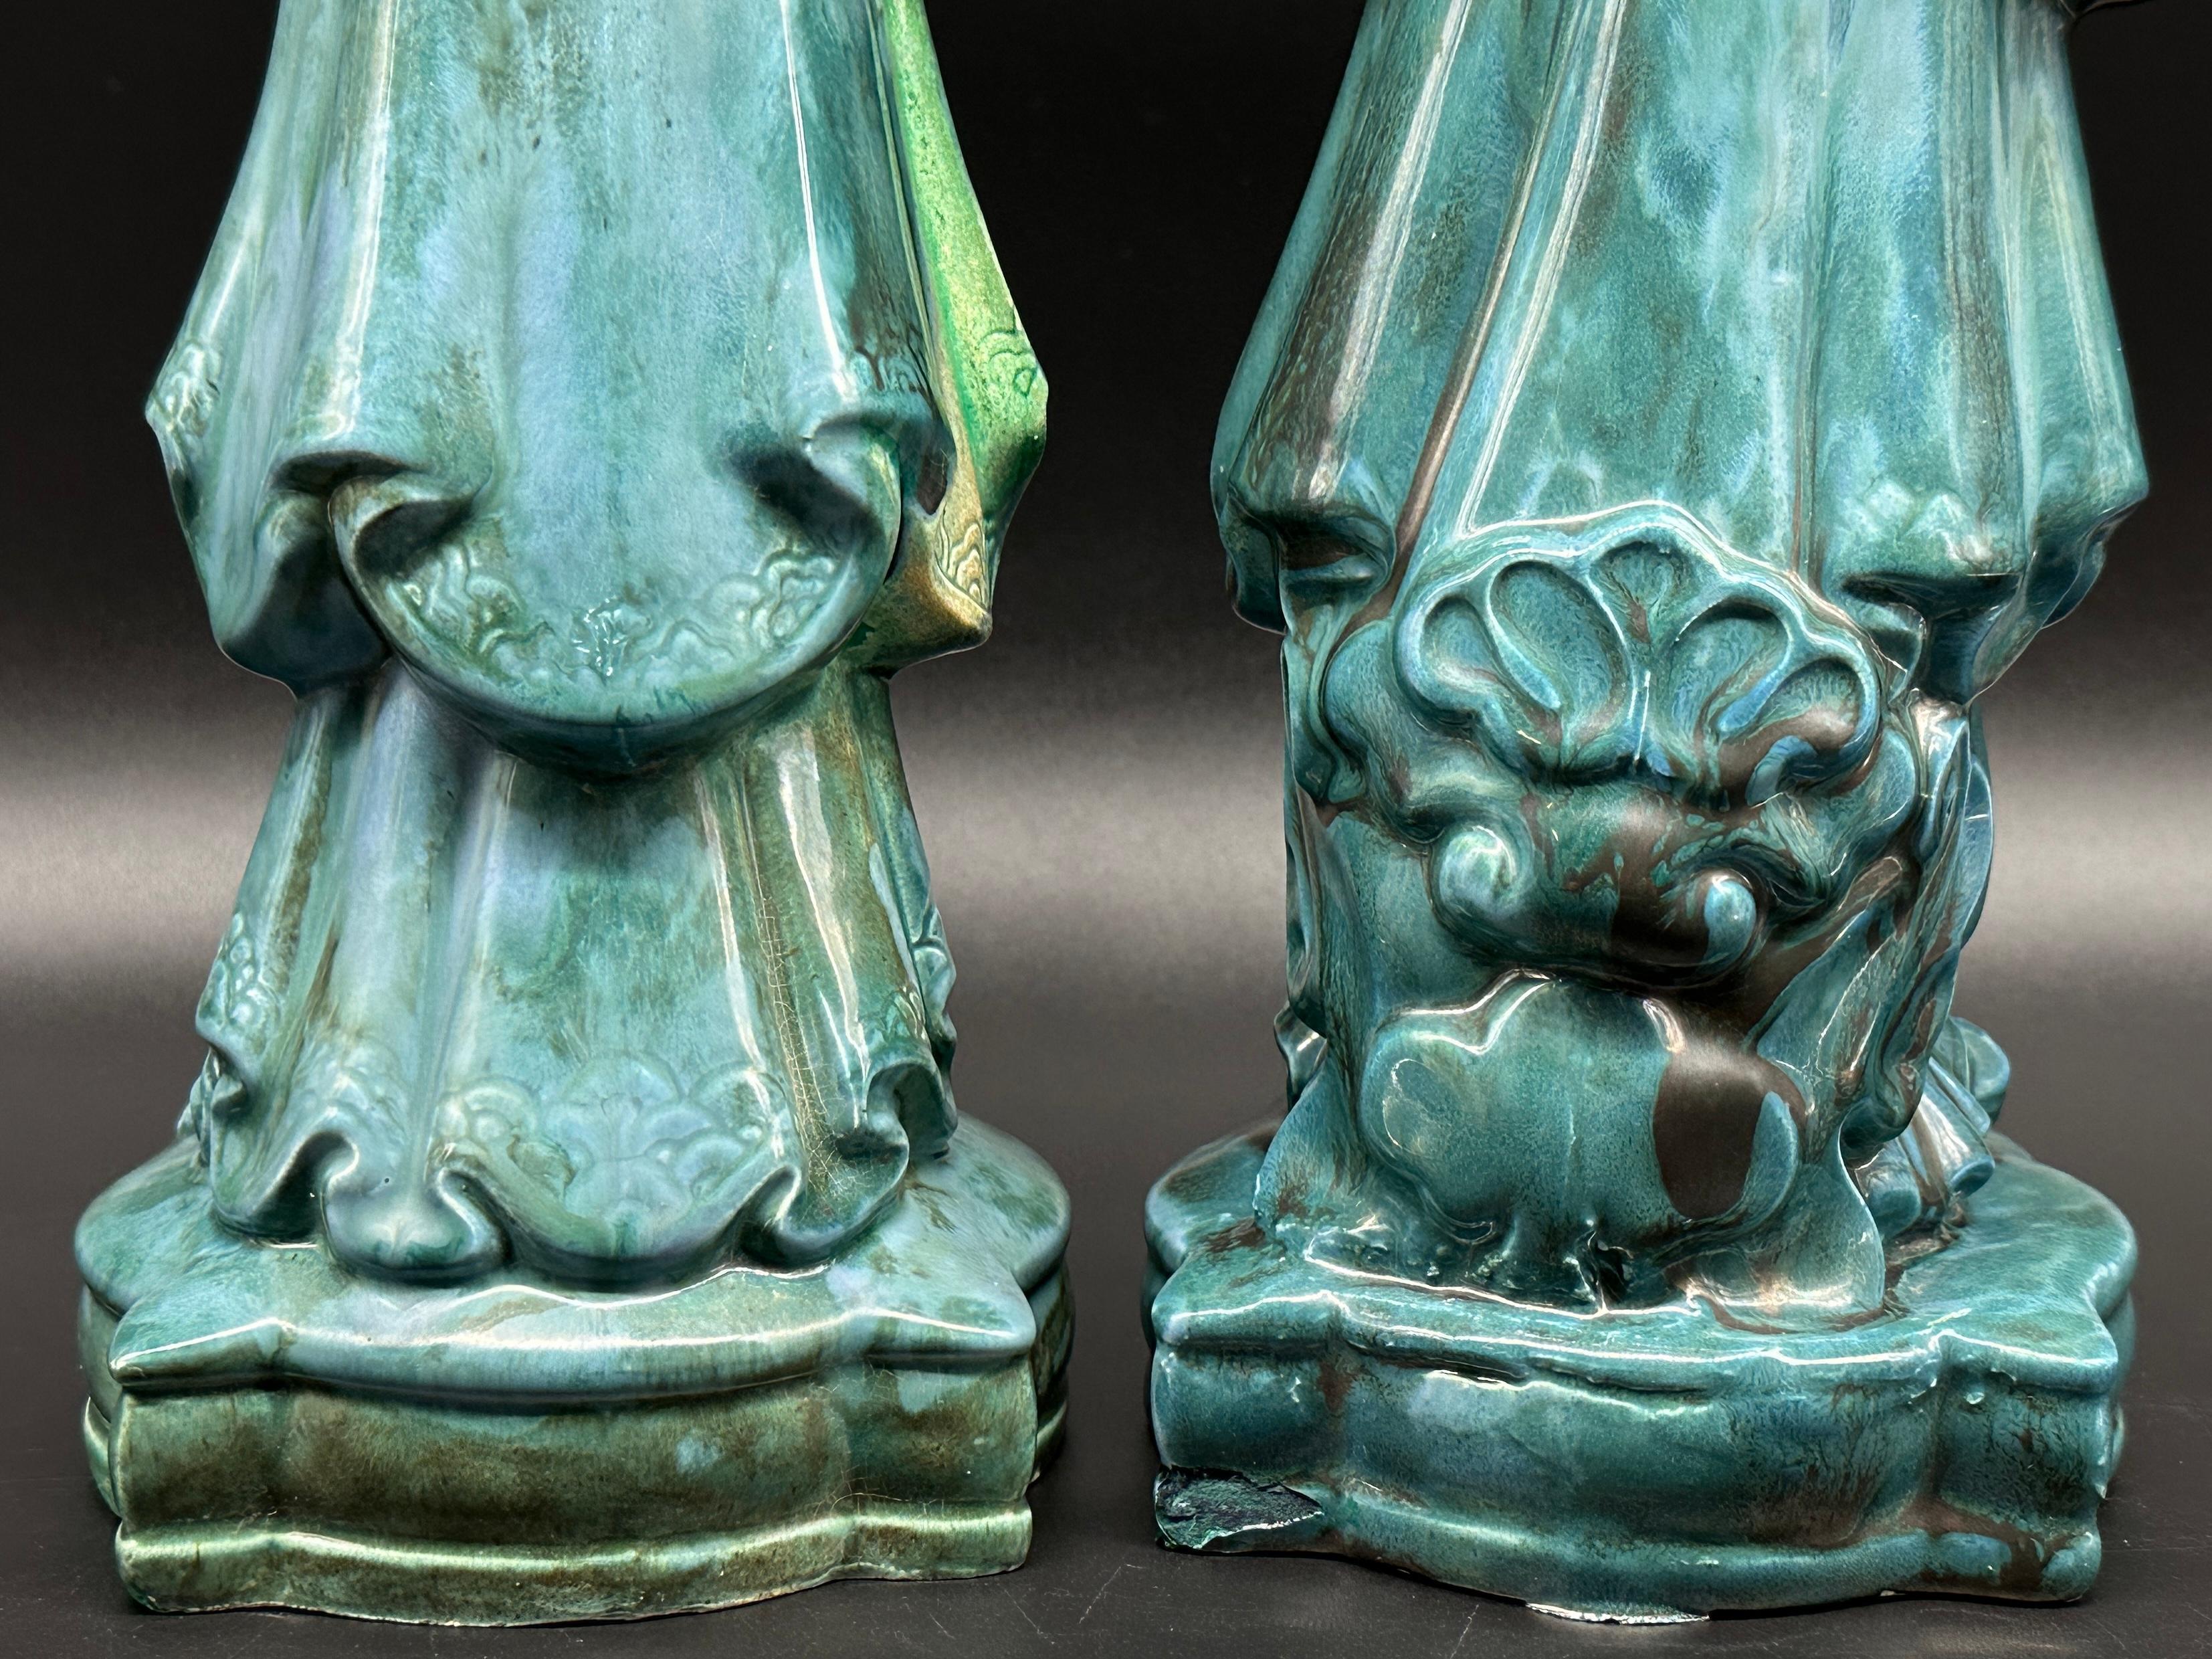 Pair of Holland Mold Oriental Statues